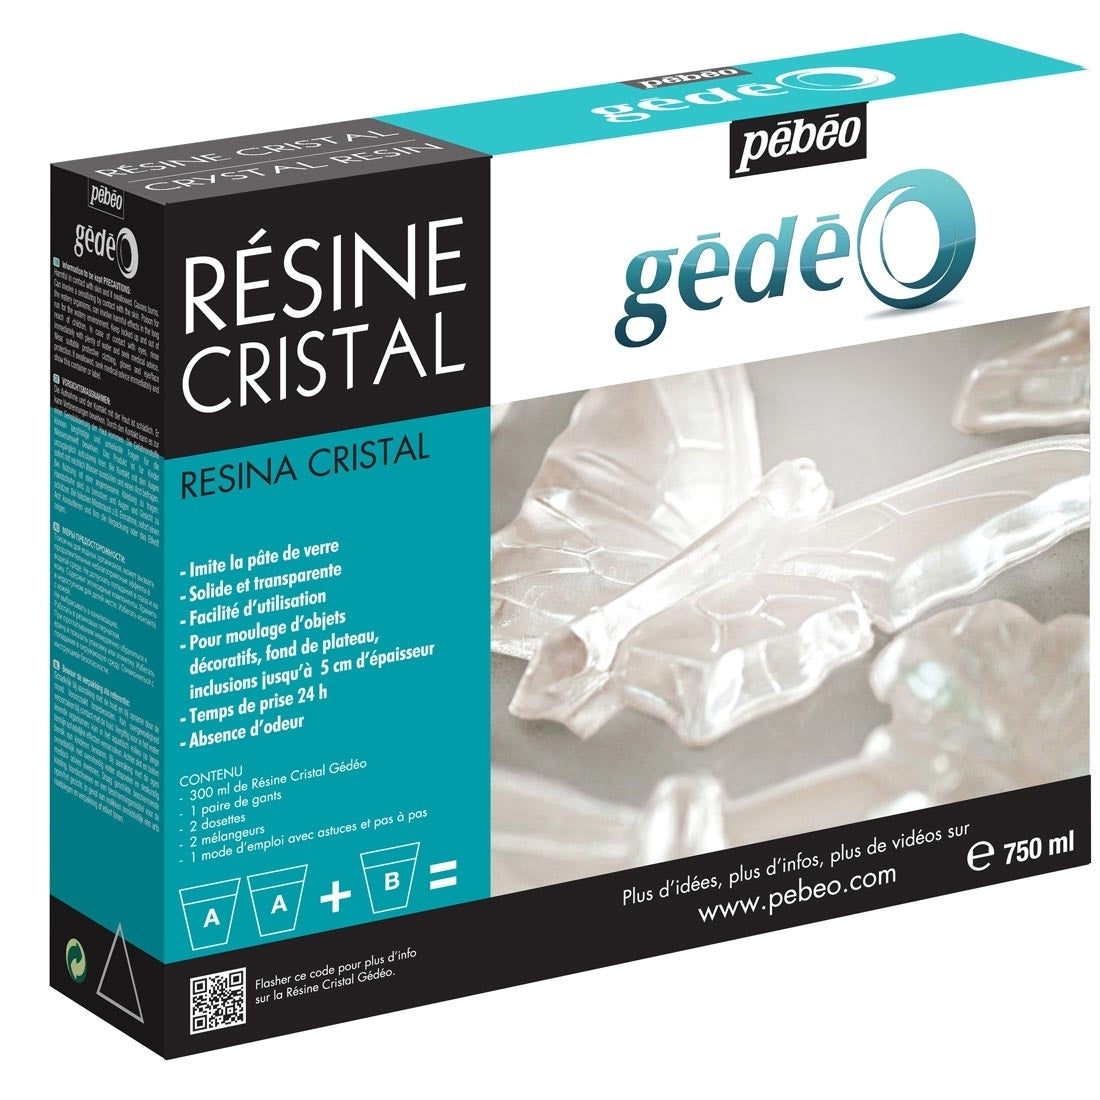 Pebeo - Gedeo - Moulage et moulage - Kit Crystal Resin - 750 ml